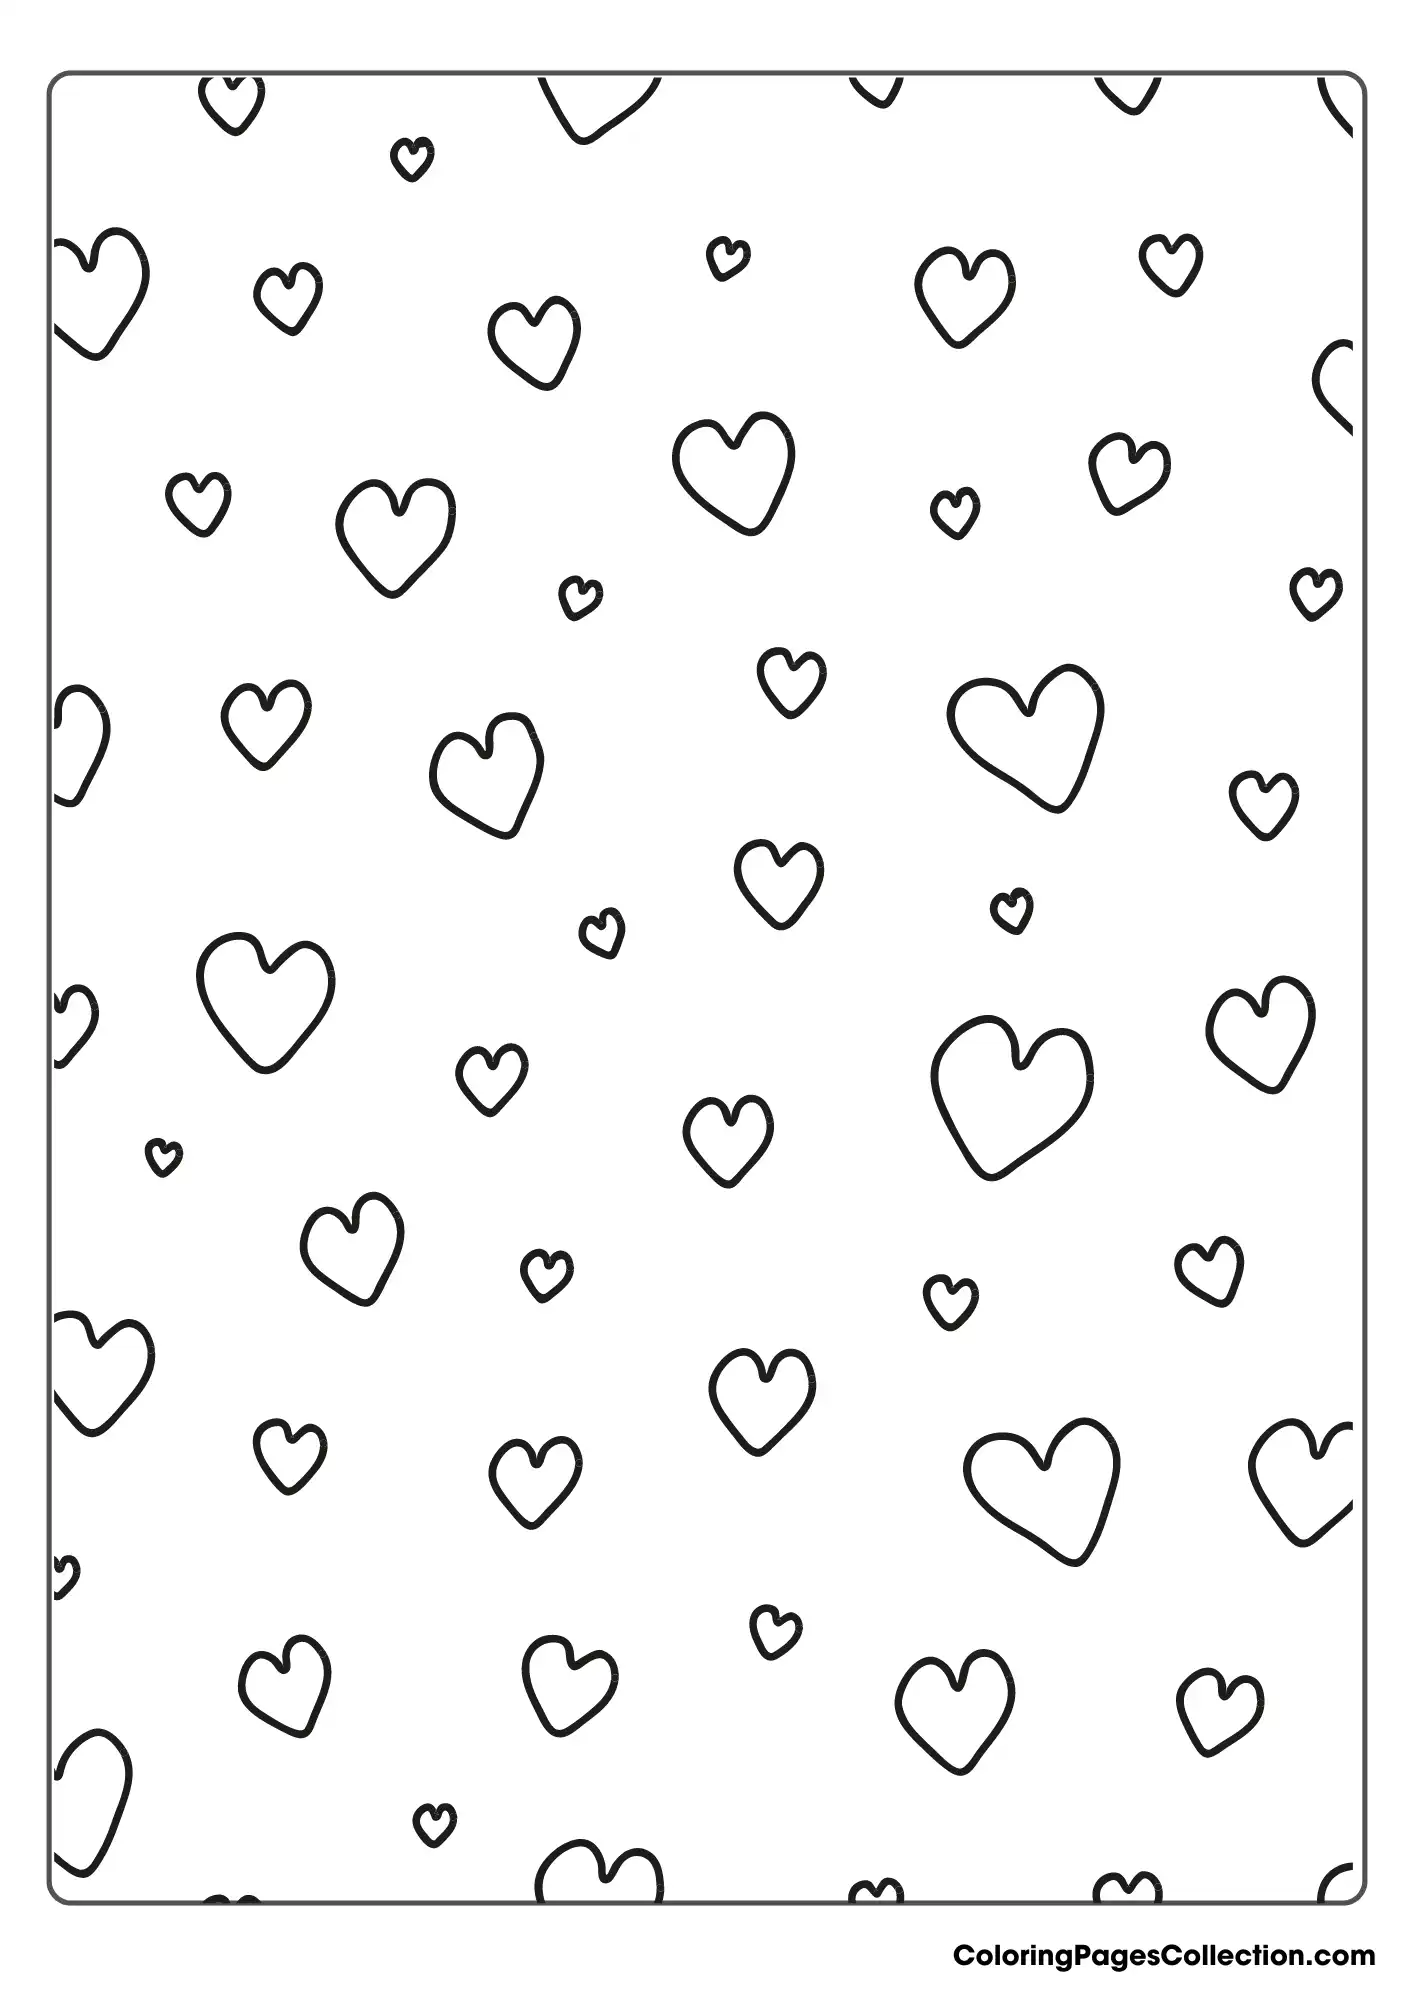 Coloring pages for teens, Only Heart